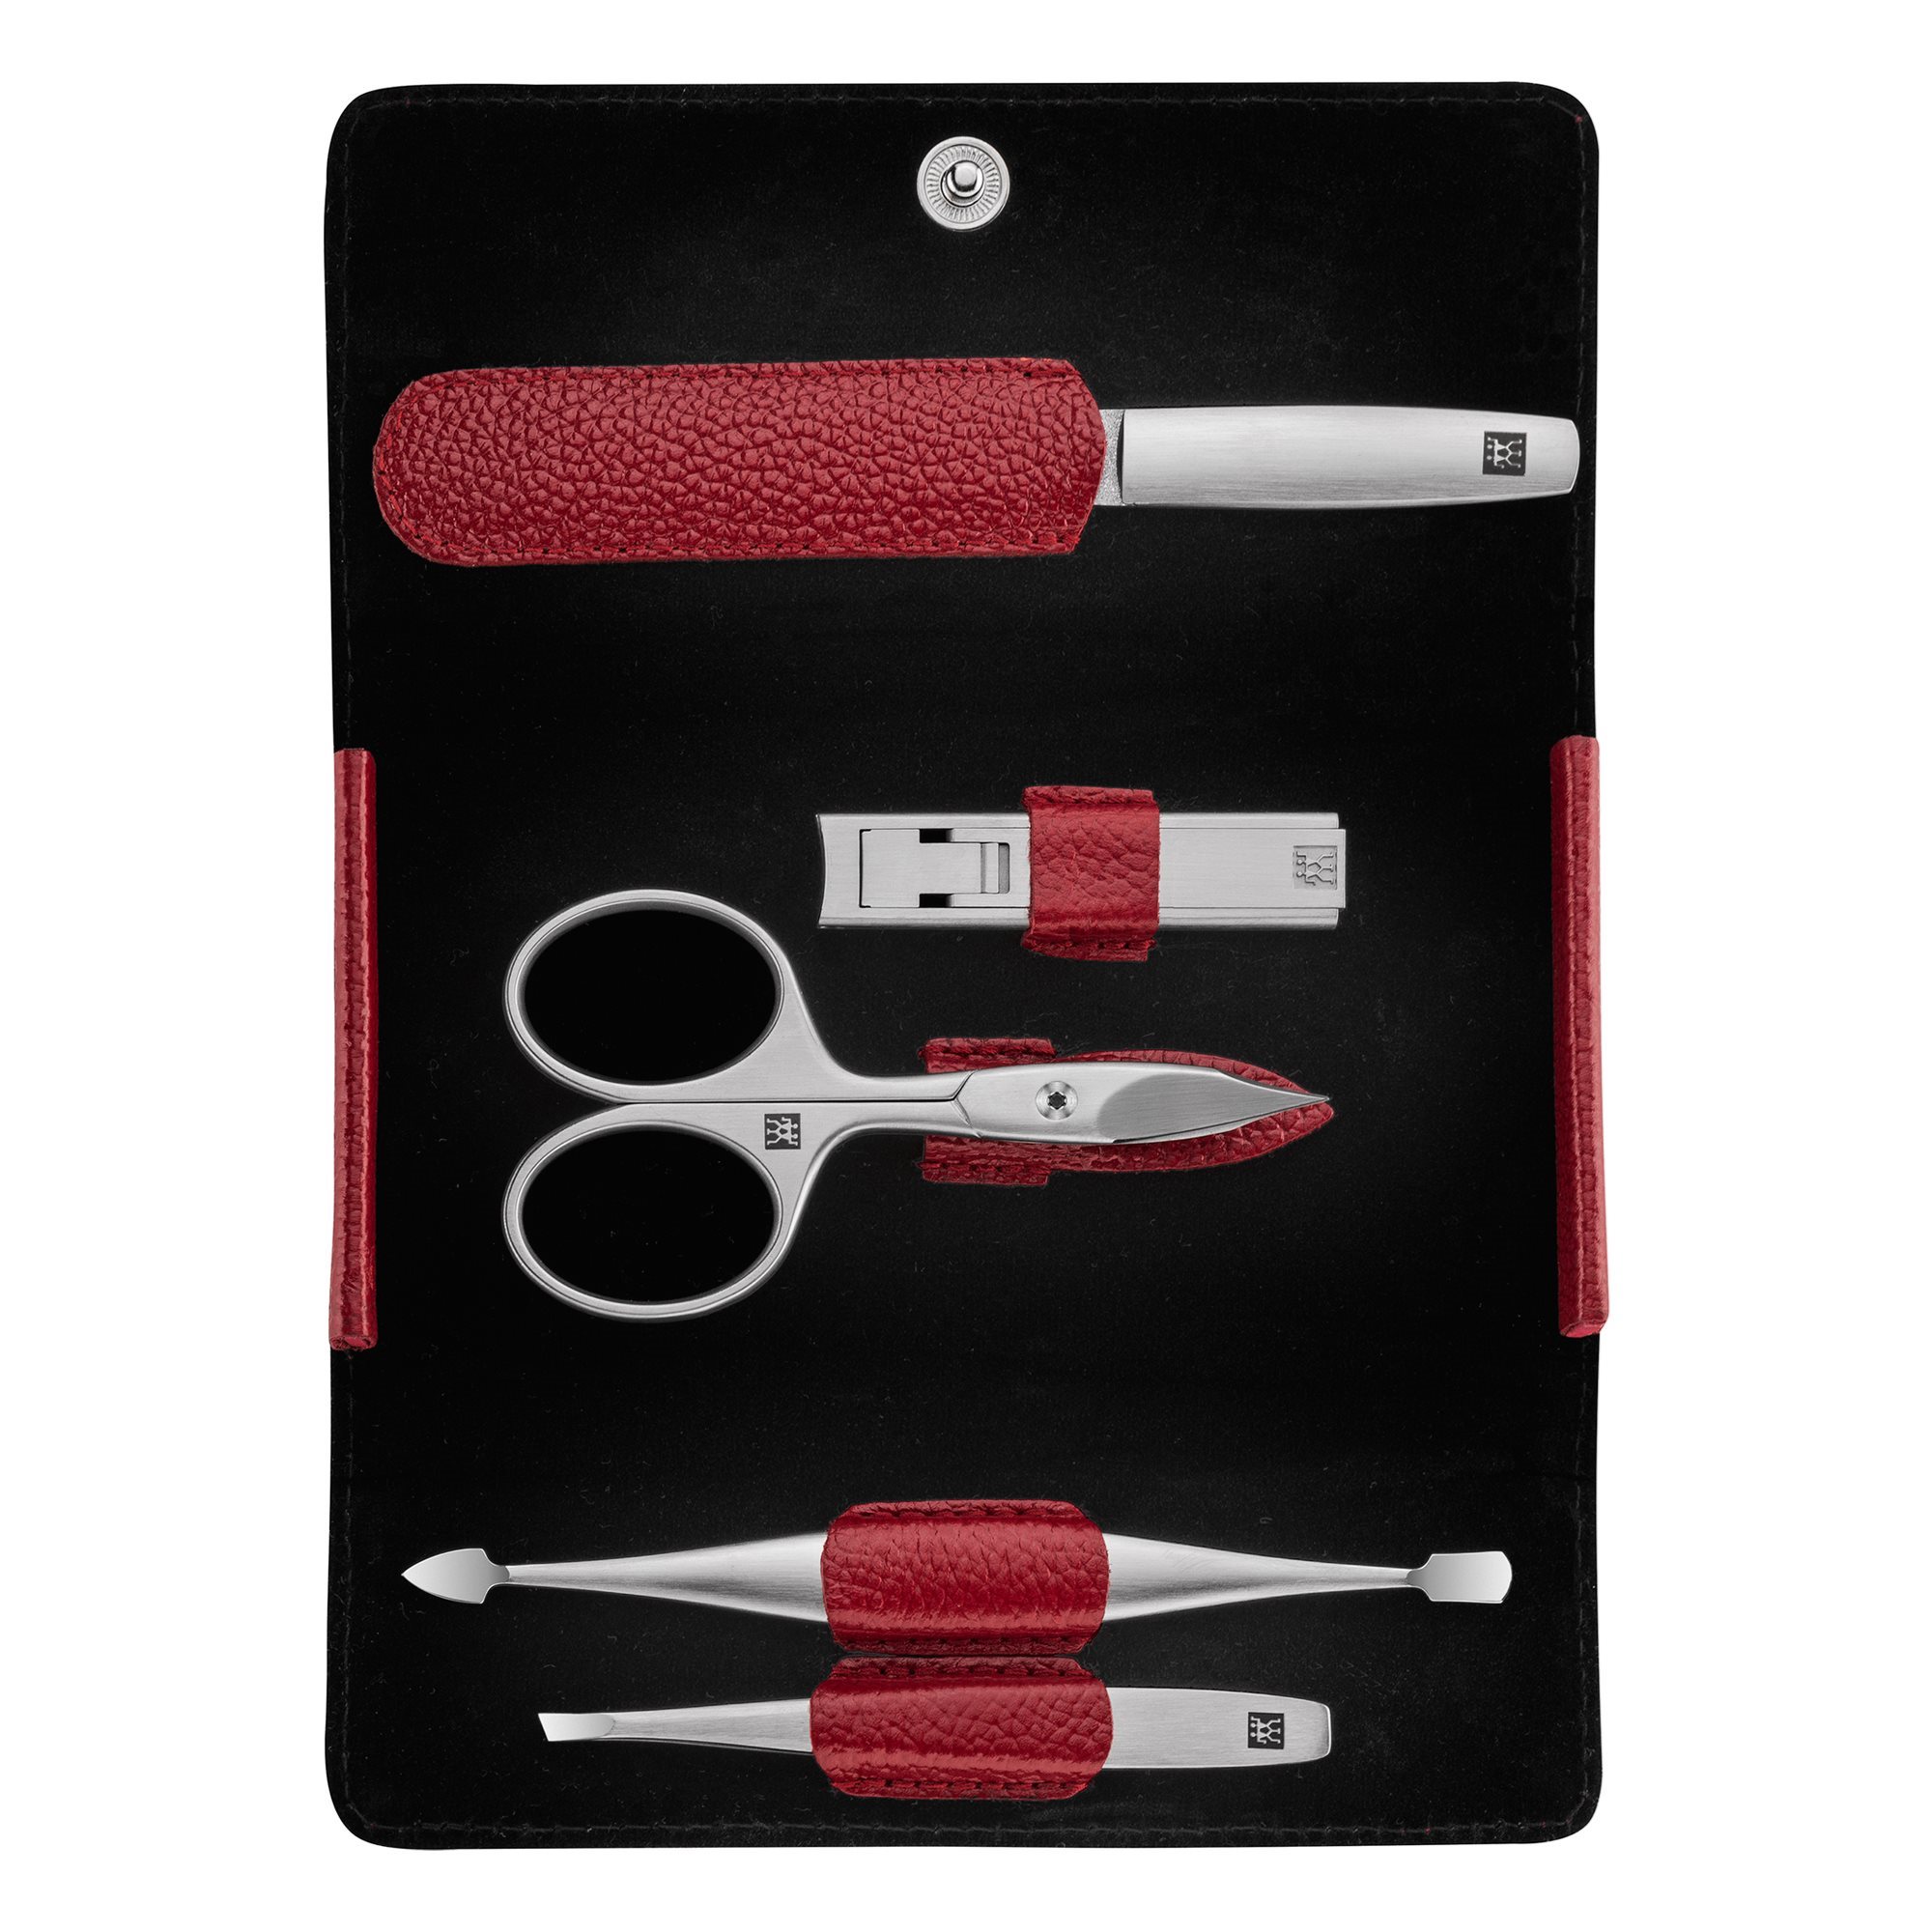 5-piece satin stainless steel set, red leather wallet - Zwilling Twinox |  KitchenShop